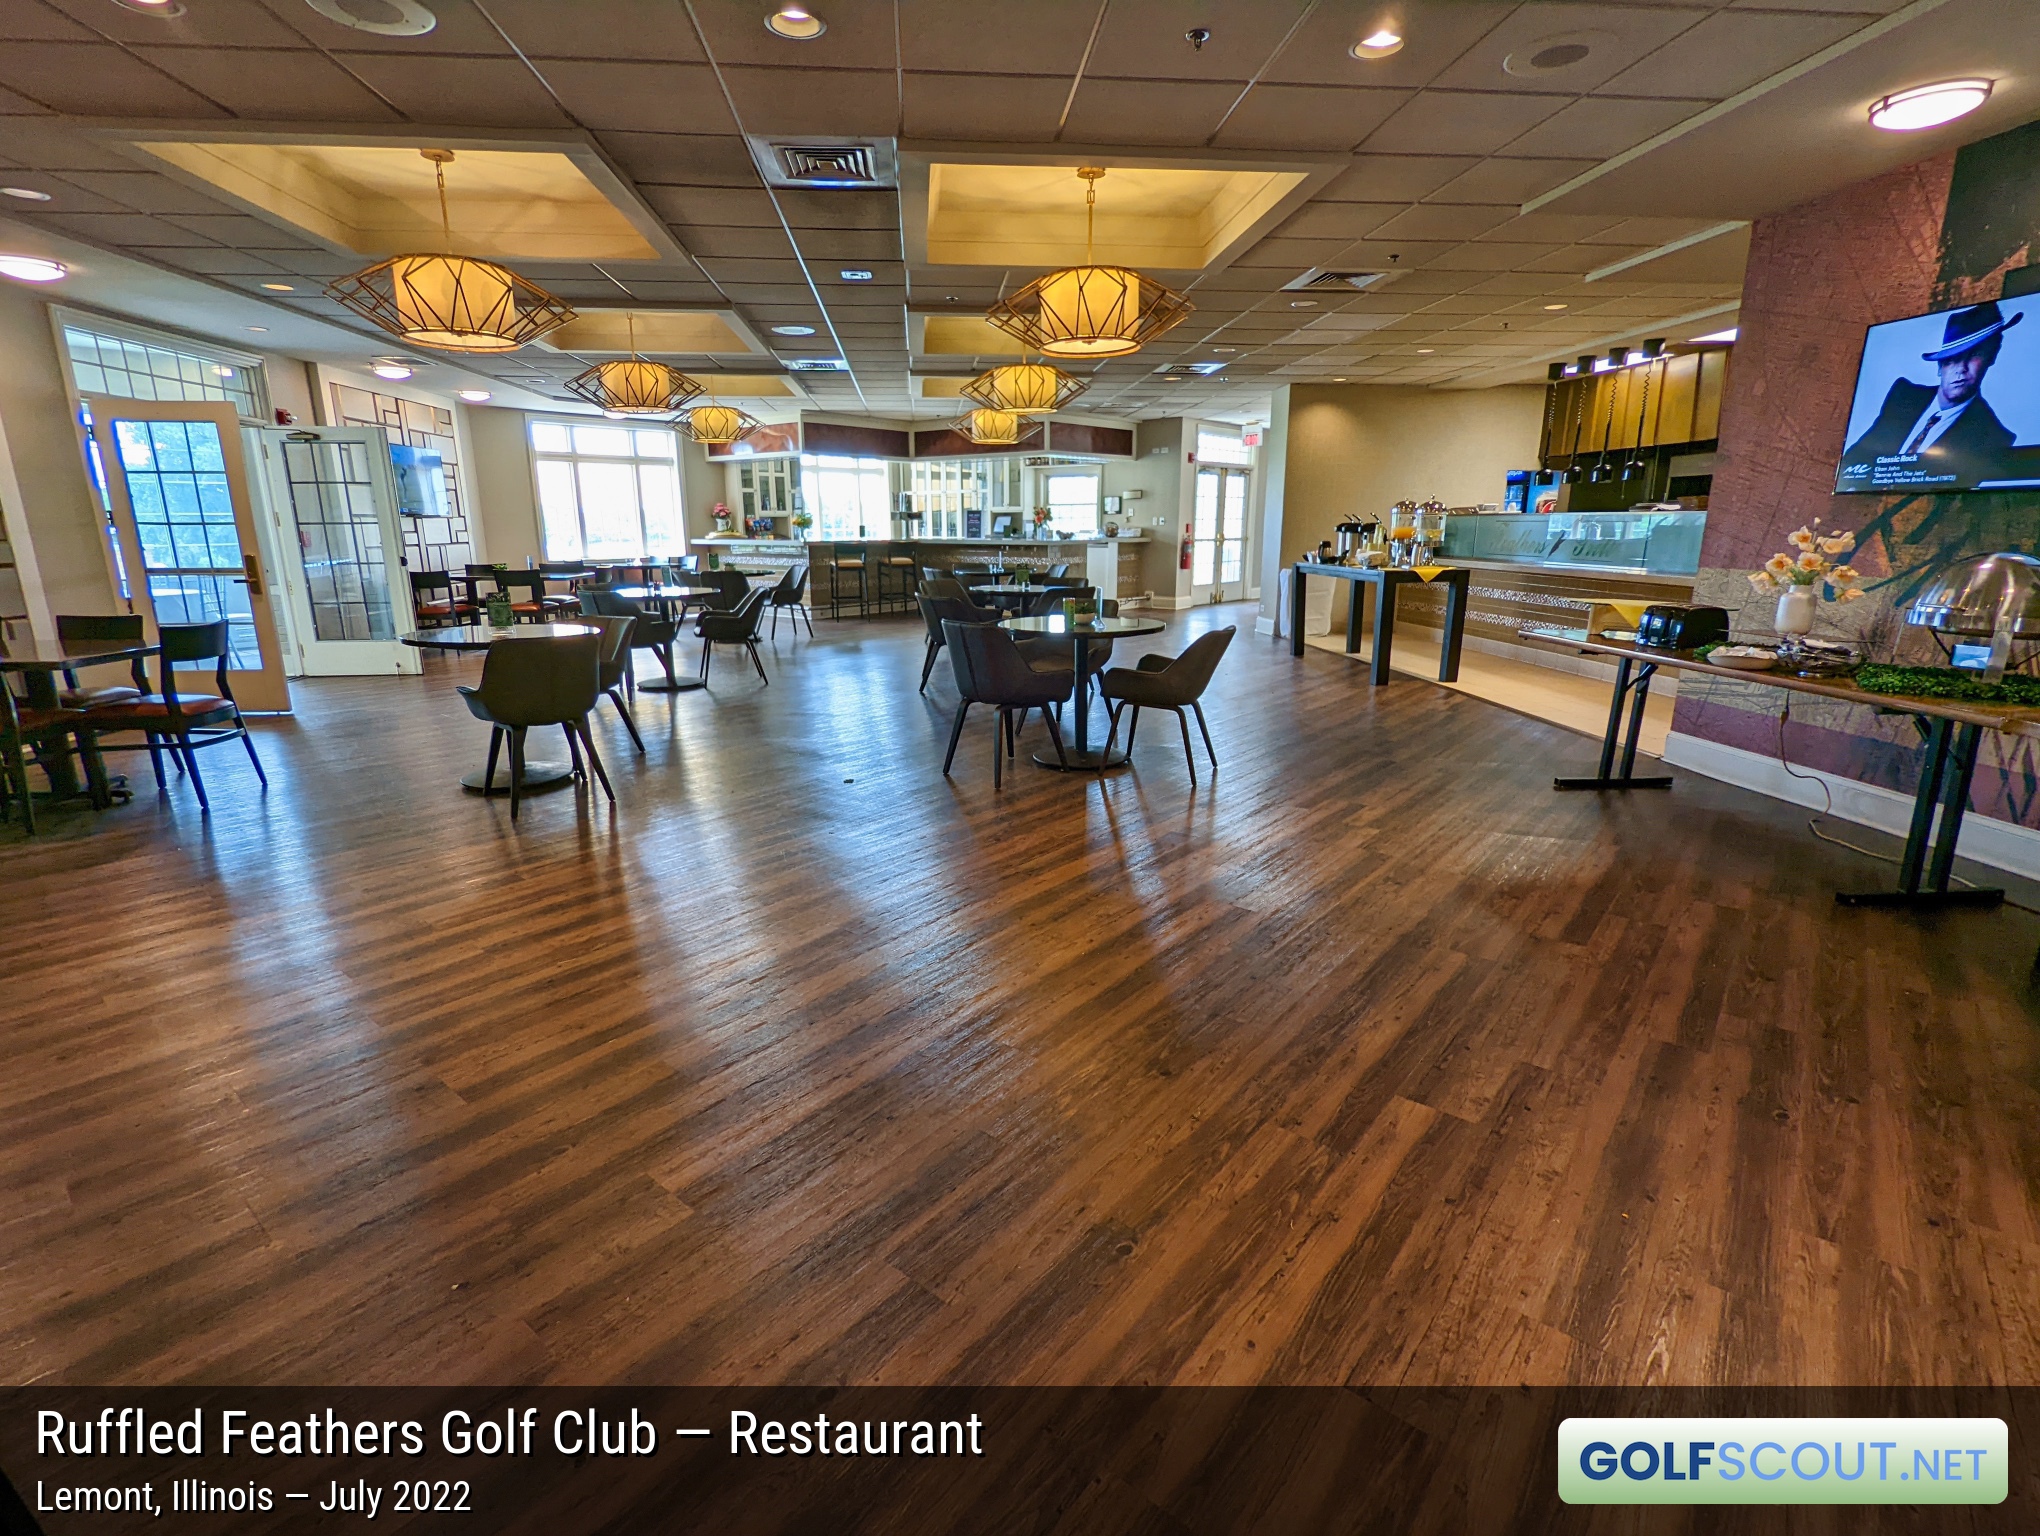 Photo of the restaurant at Ruffled Feathers Golf Club in Lemont, Illinois. 